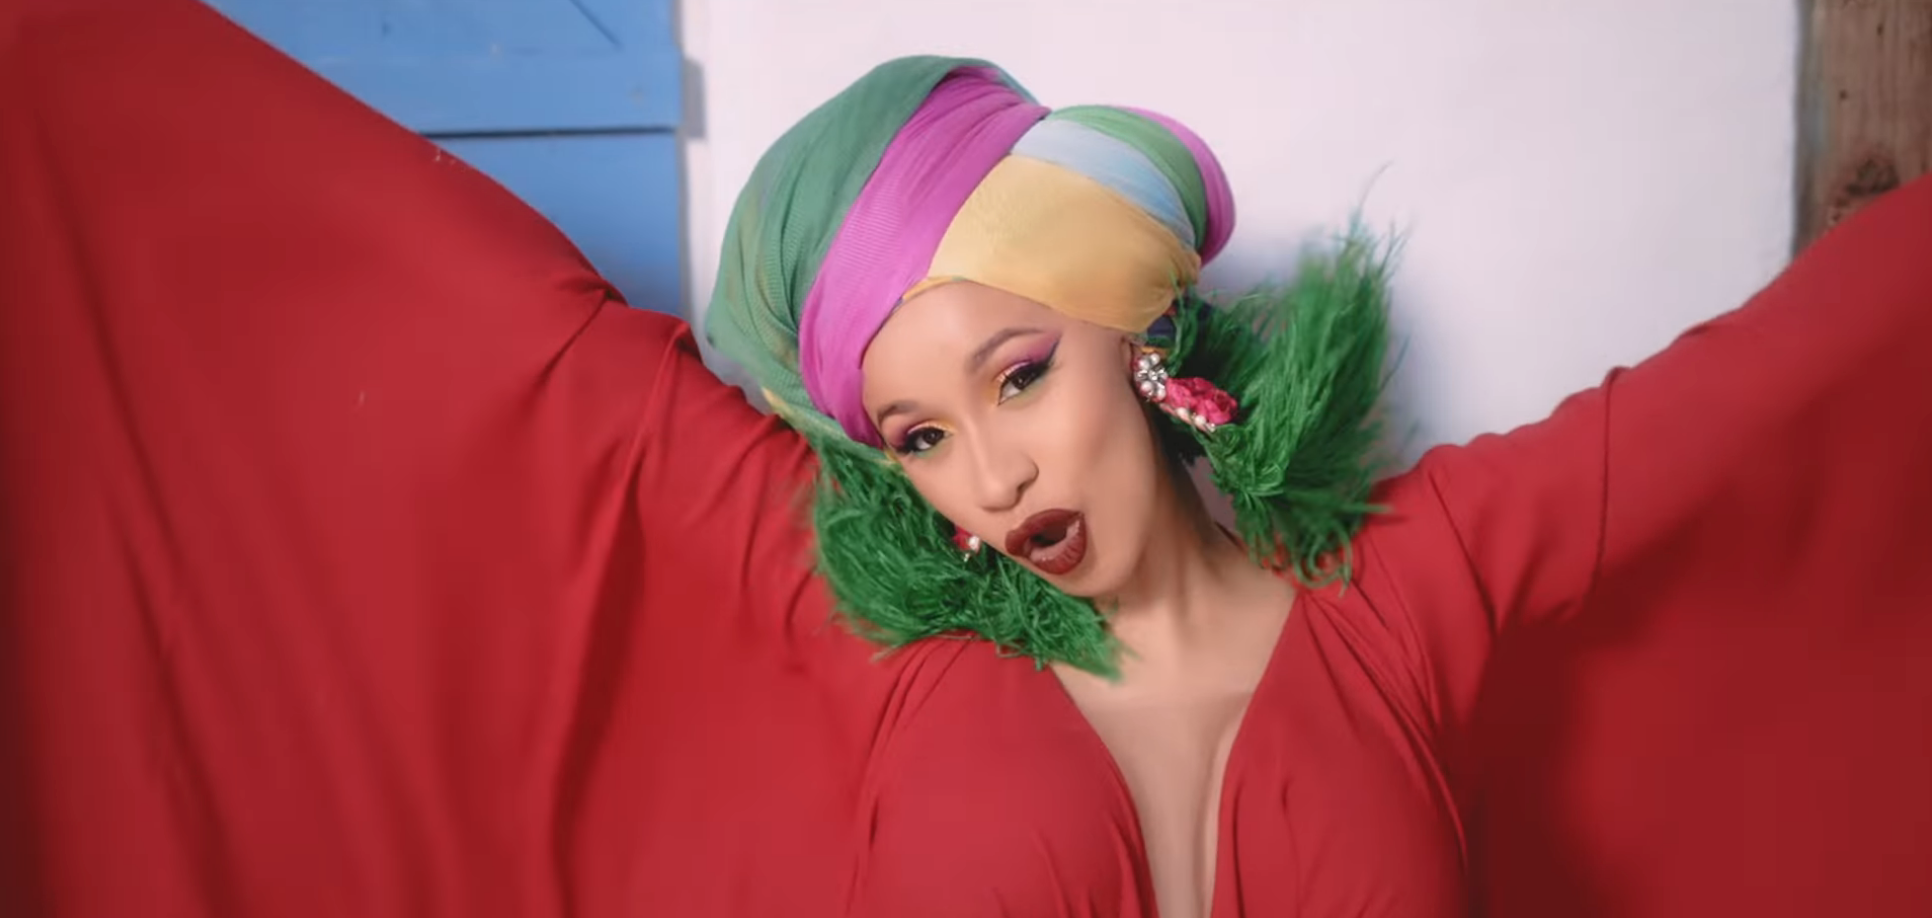 Cardi B Shares Vibrant New Video For 'I Like It'
